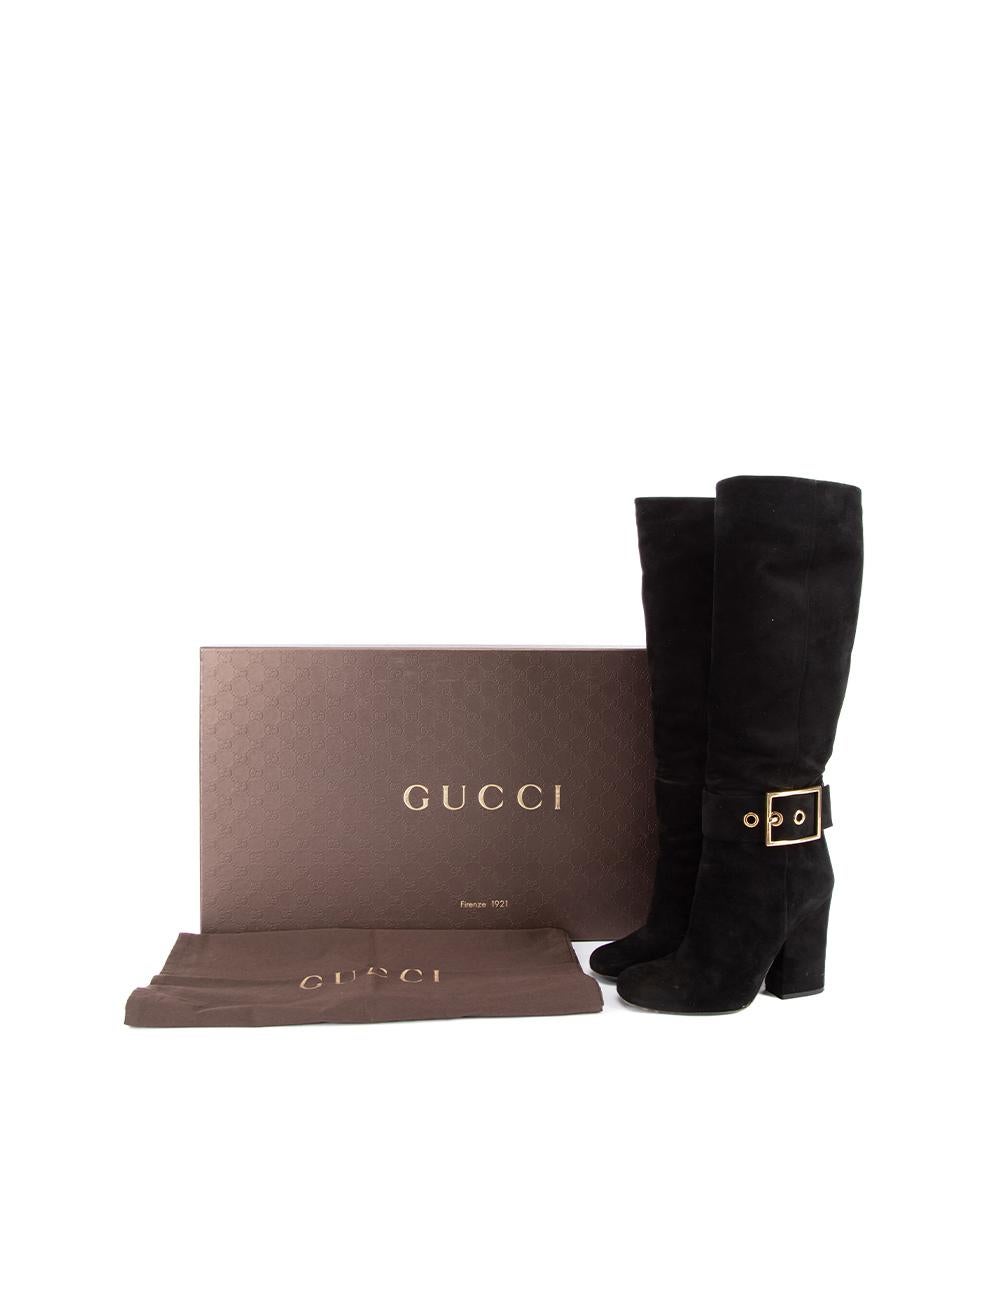 Gucci Women's Black Suede Kesha Knee Boots For Sale 2